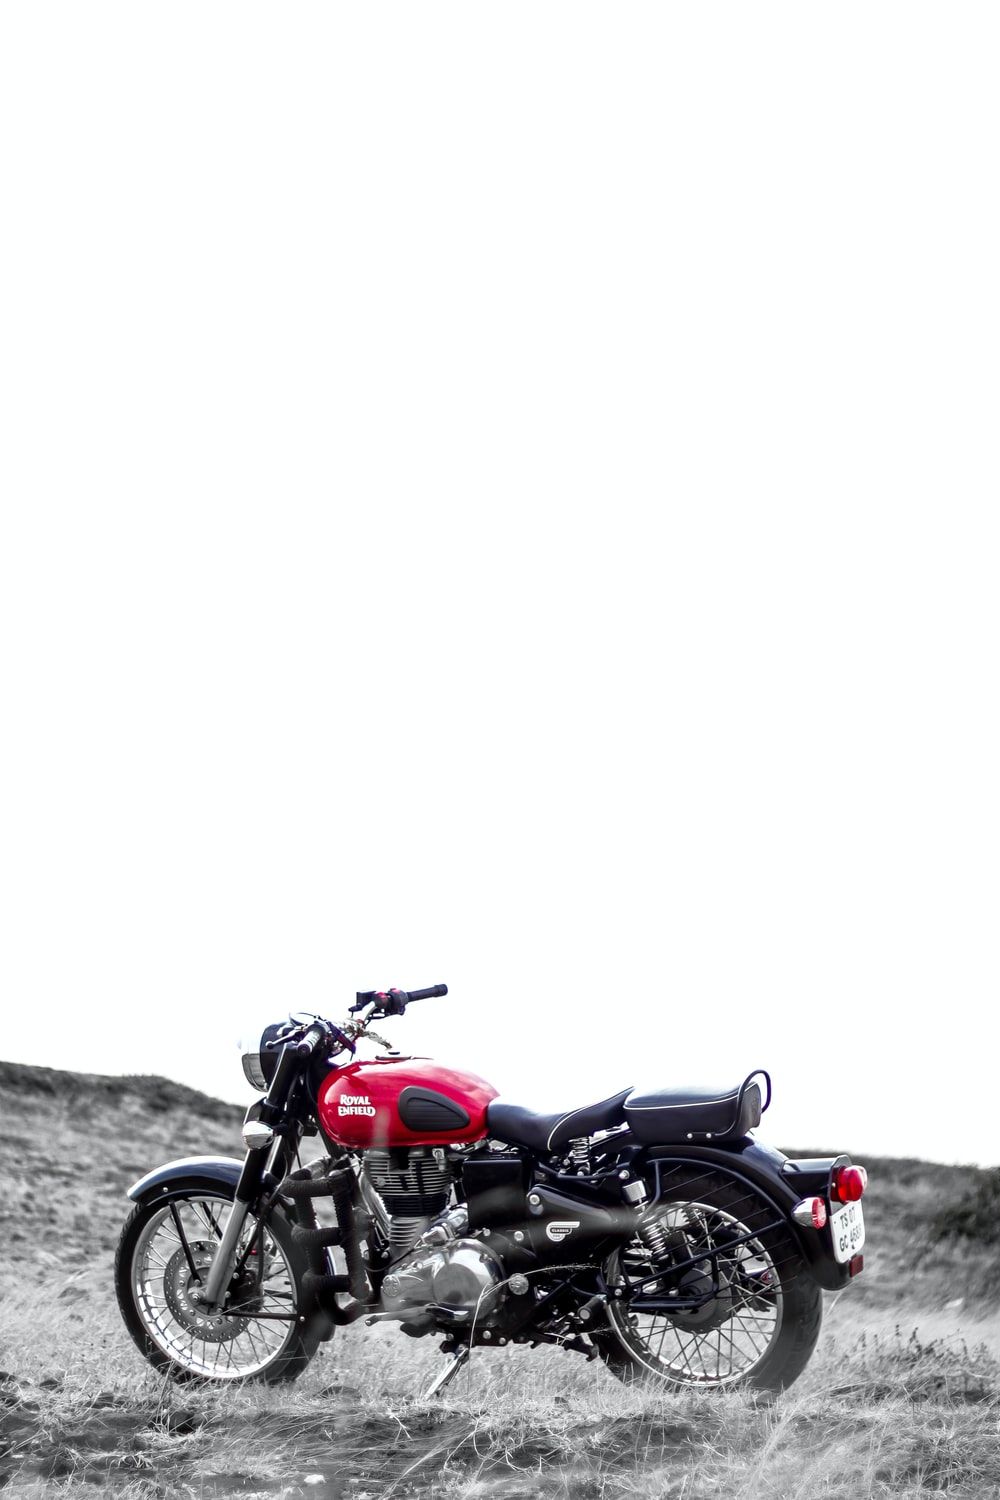 Royalenfield Picture. Download Free Image